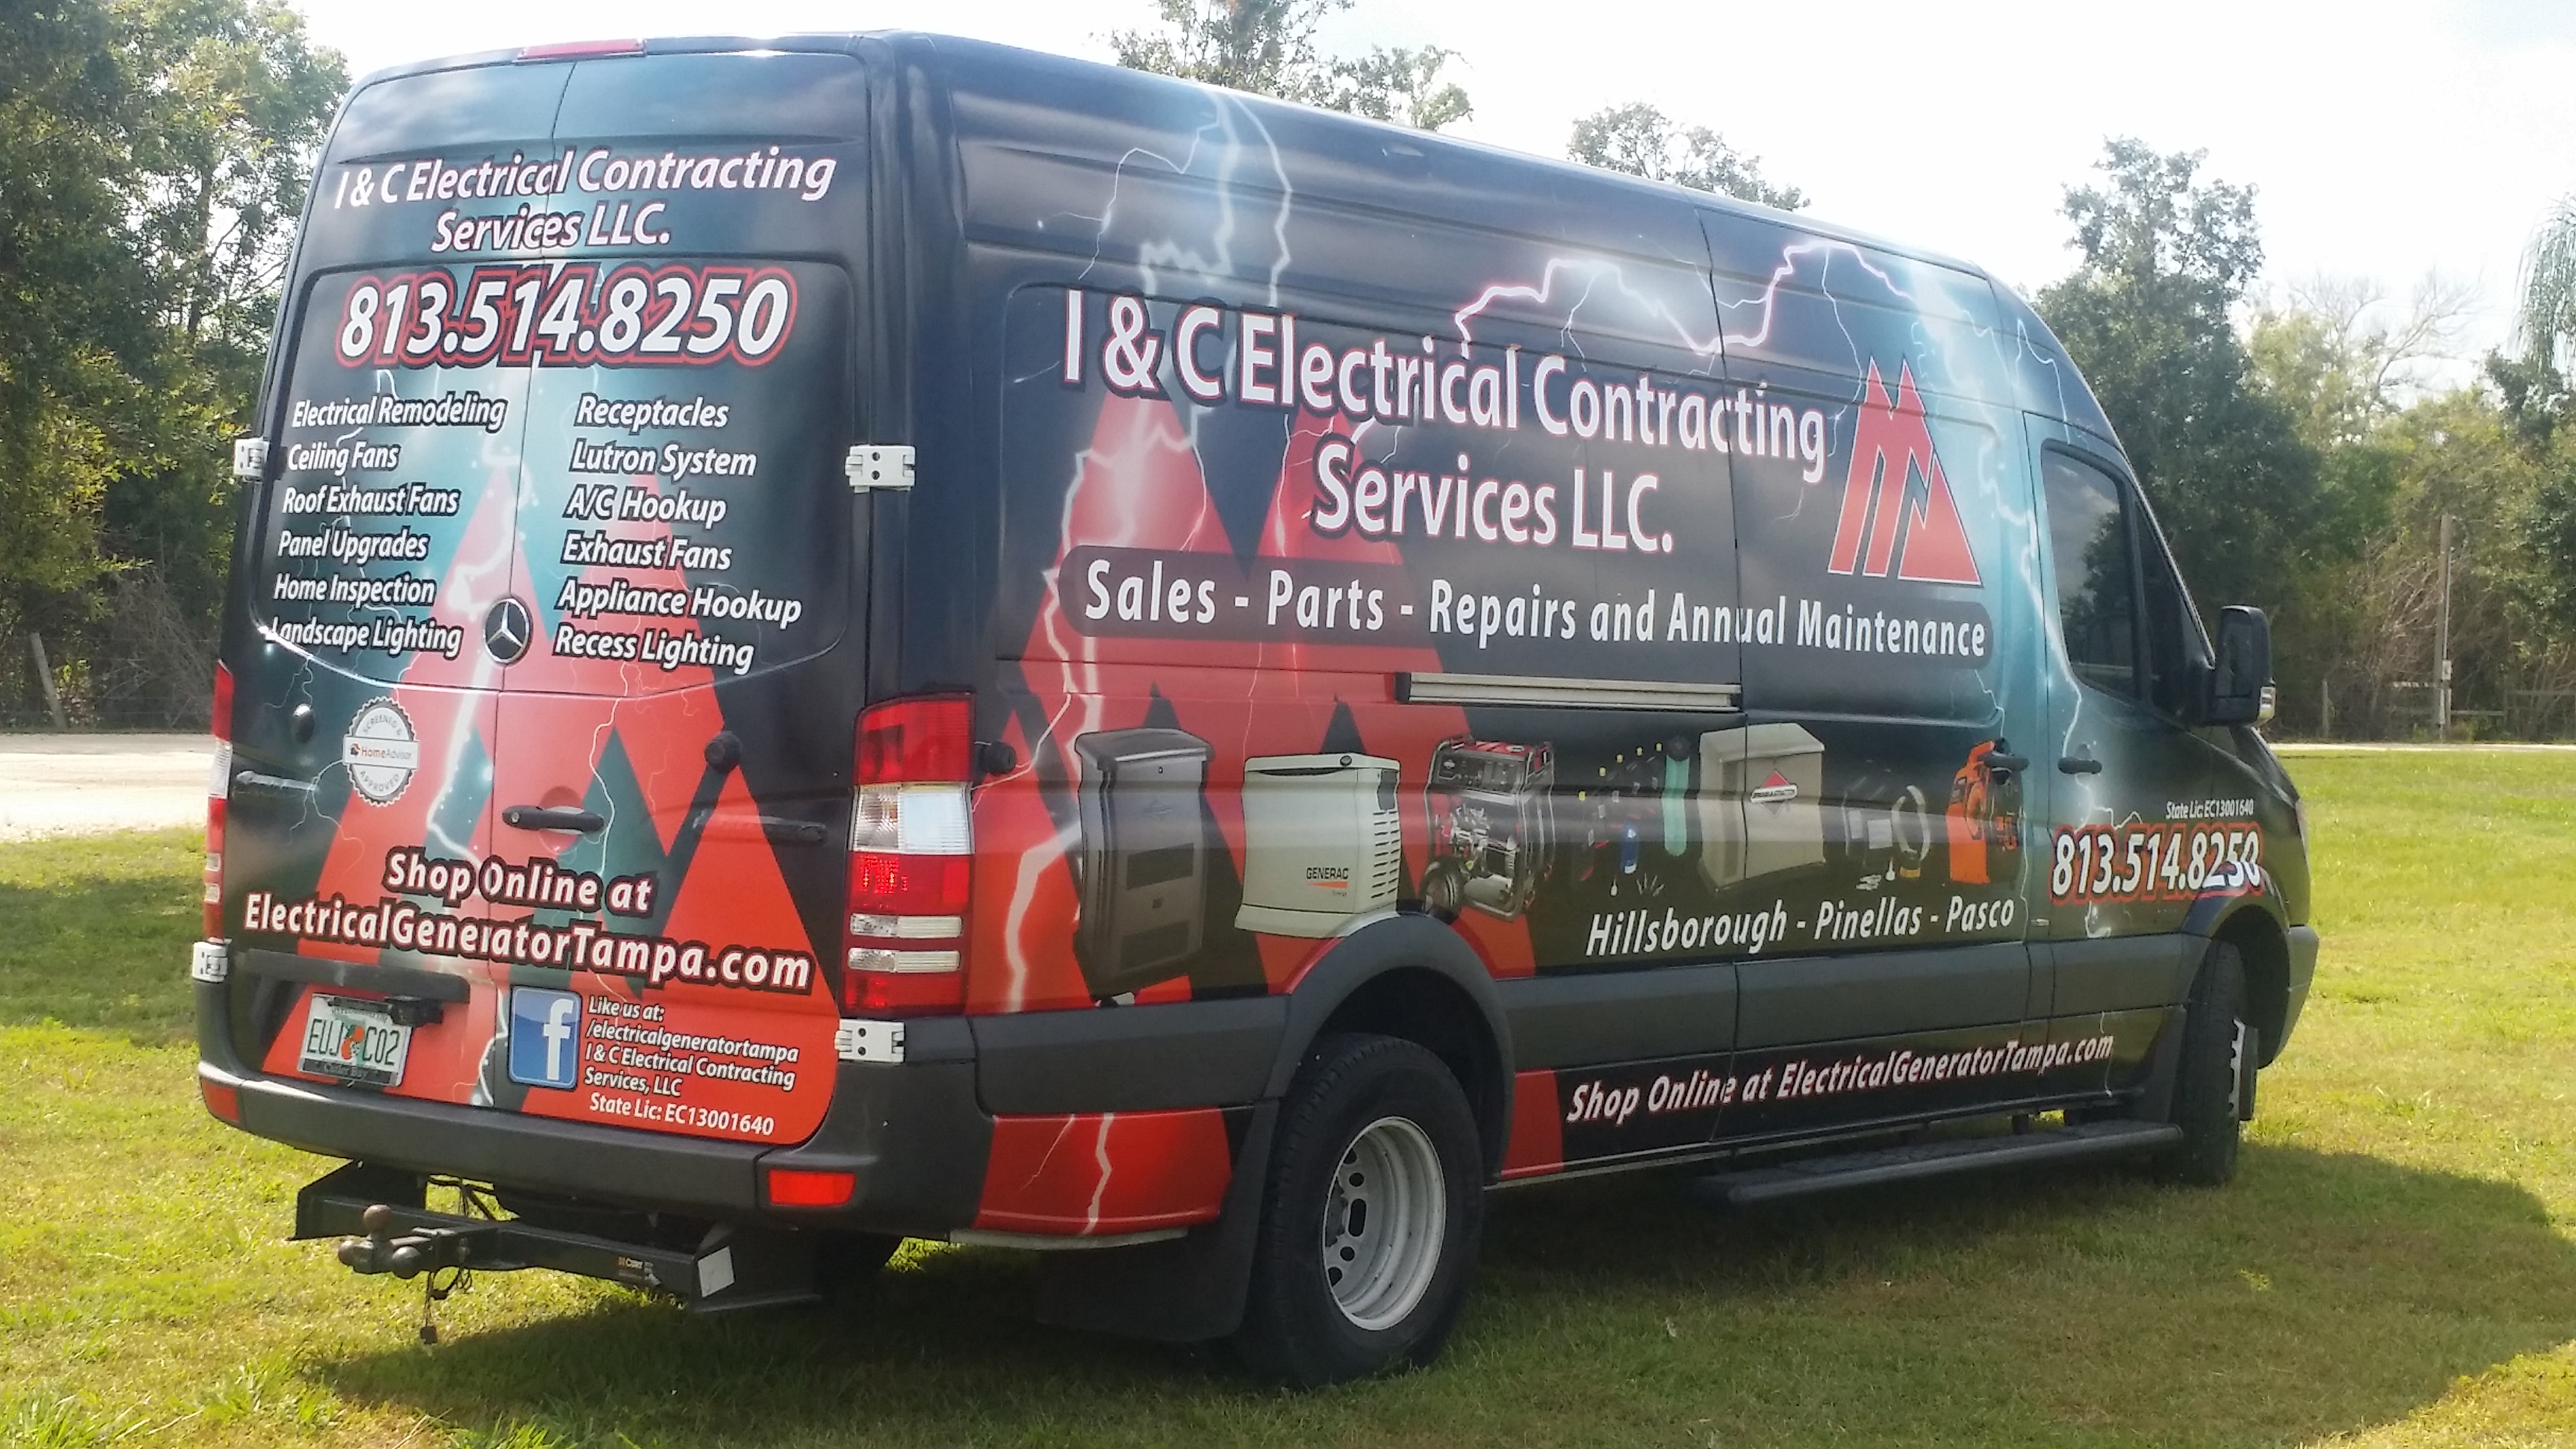 Call us today for our Generator deals!